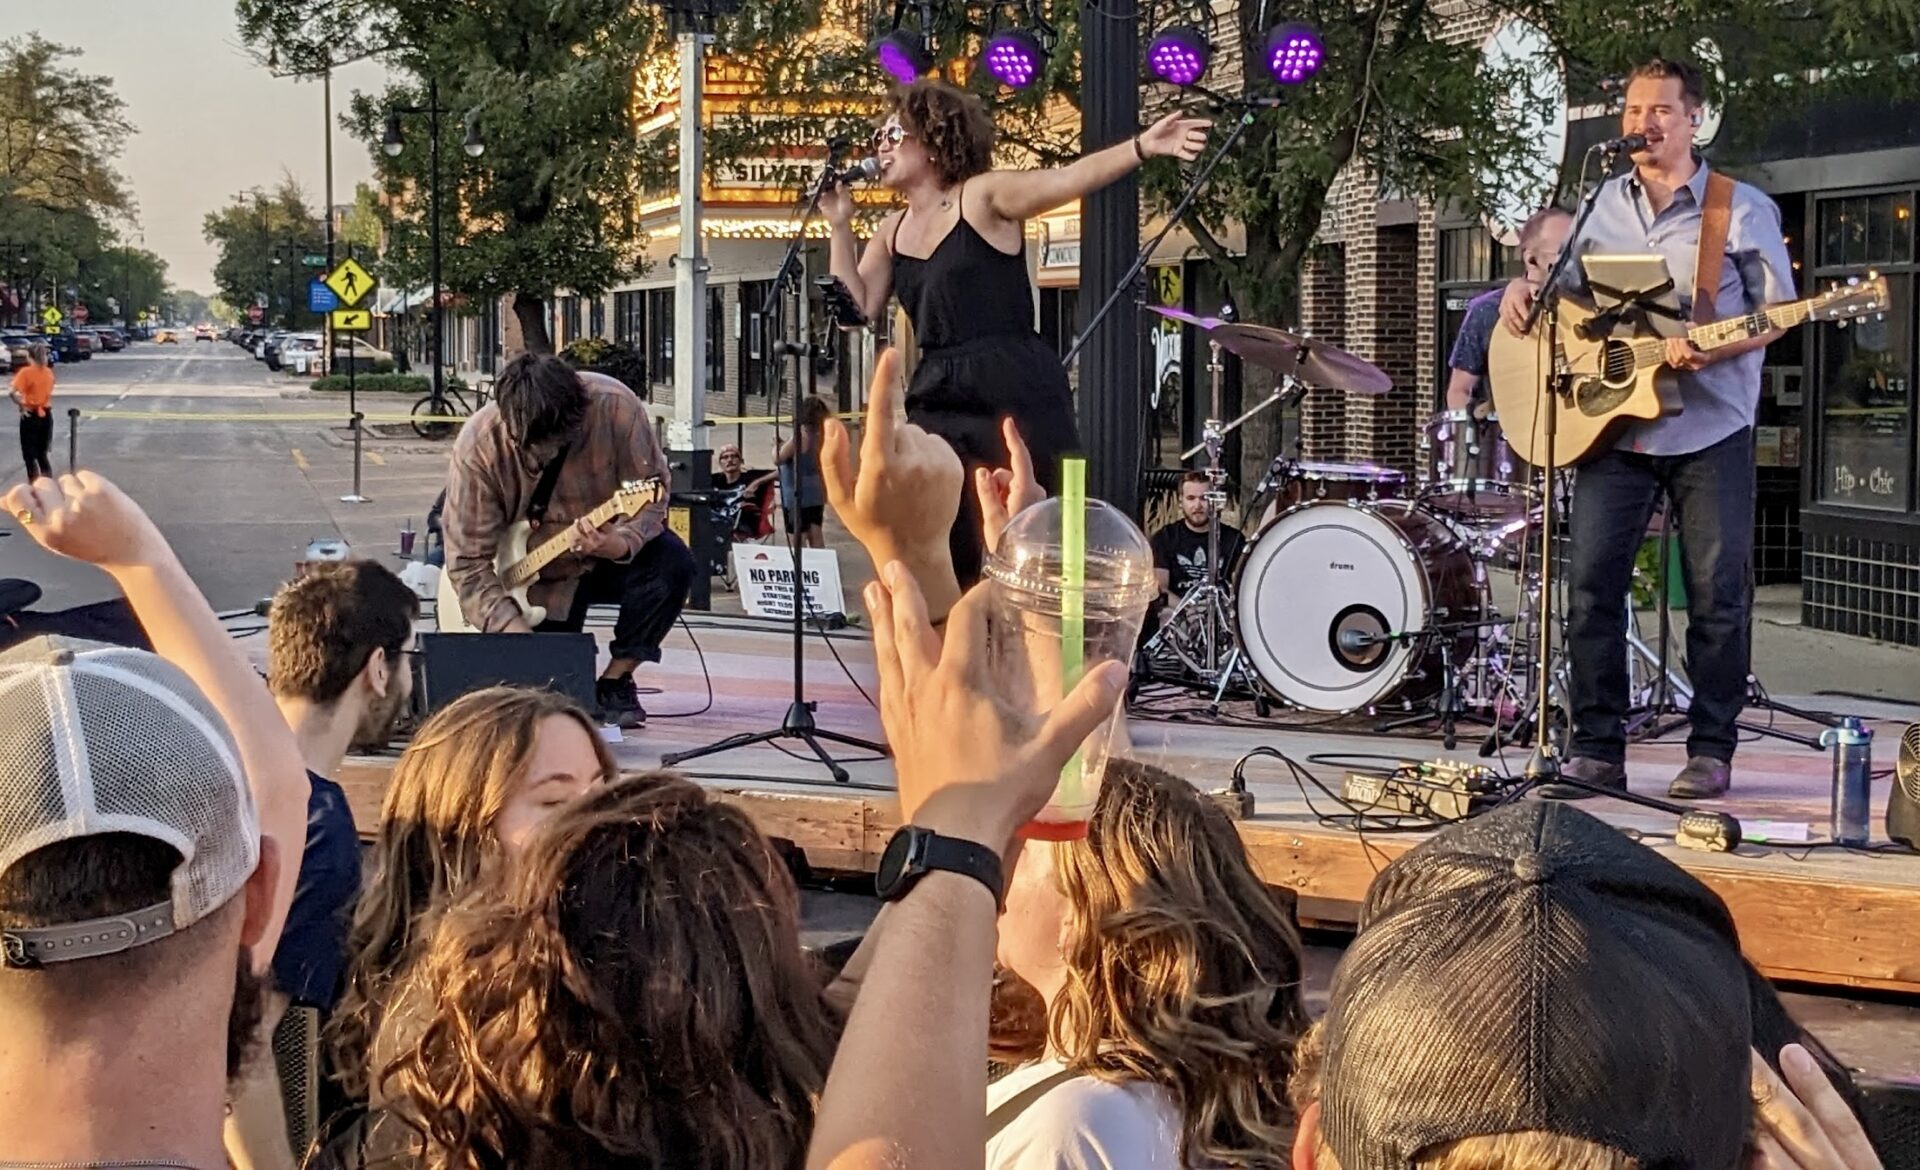 The Silver Alchemist provided entertainment during the Sizzlin' Summer Nights downtown concert on Friday, Aug. 25. Aberdeen Insider photo by Scott Waltman